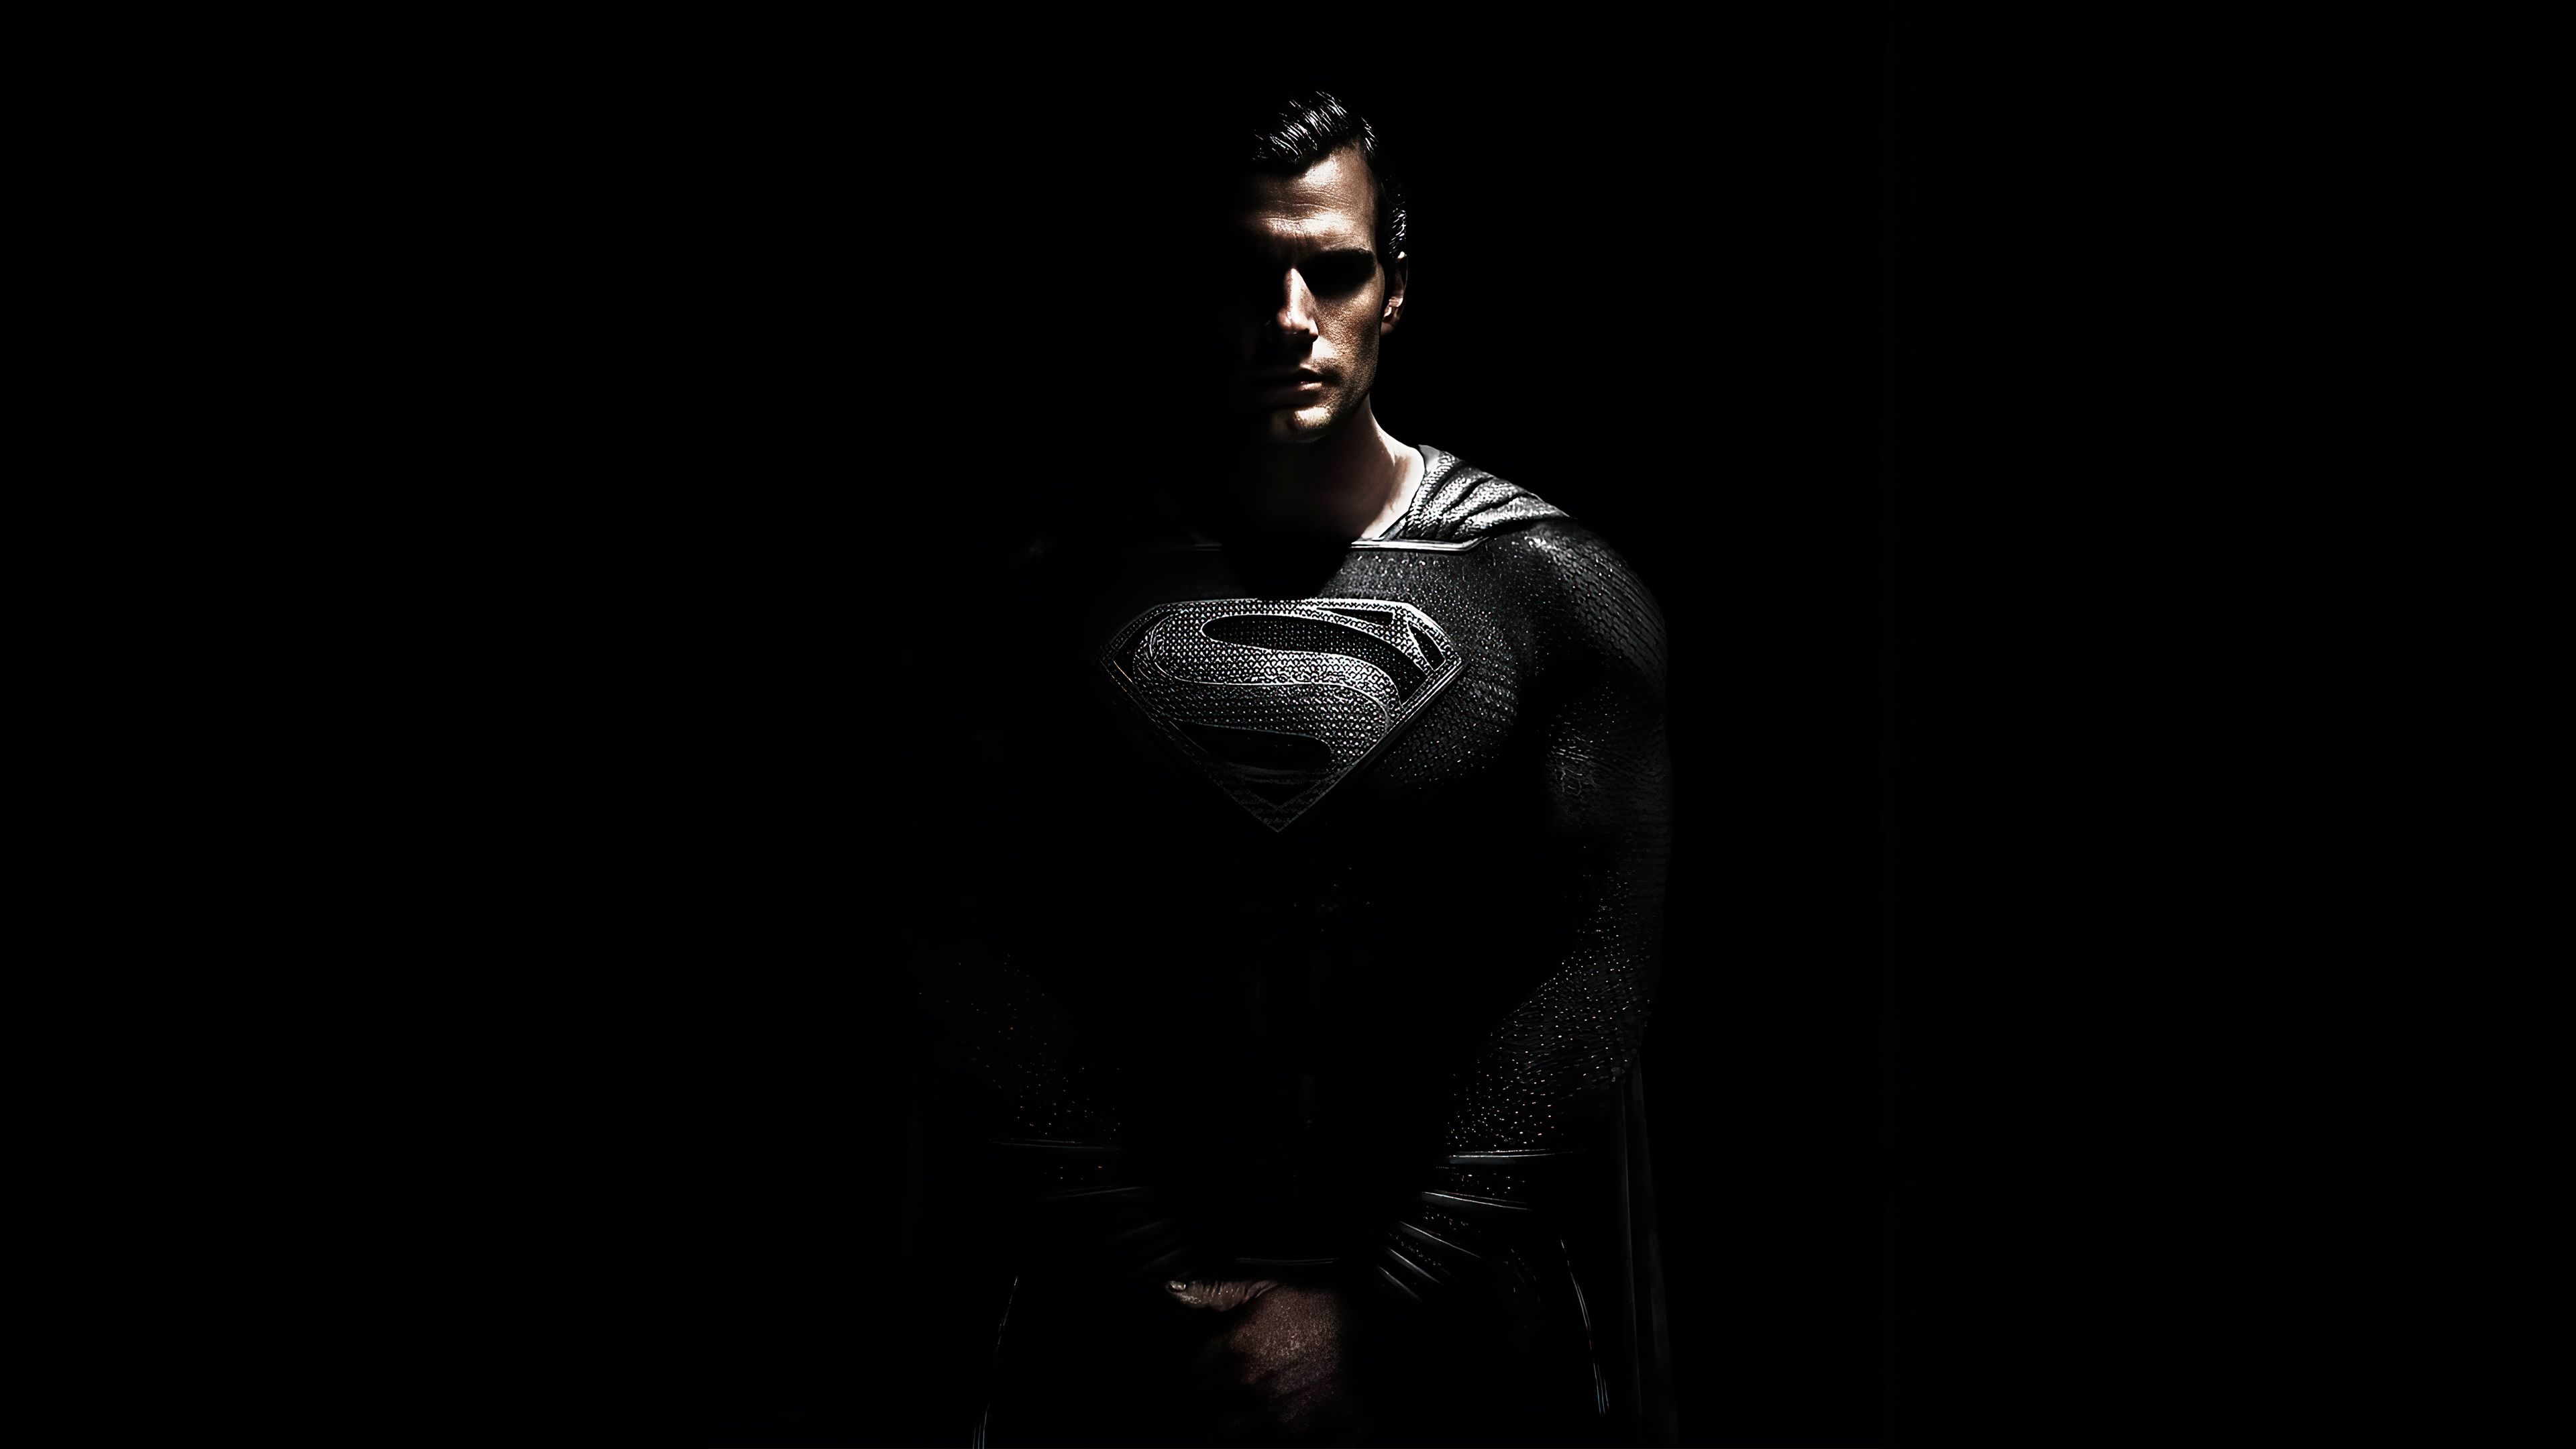 Henry Cavill Superman campaign continues with preparations